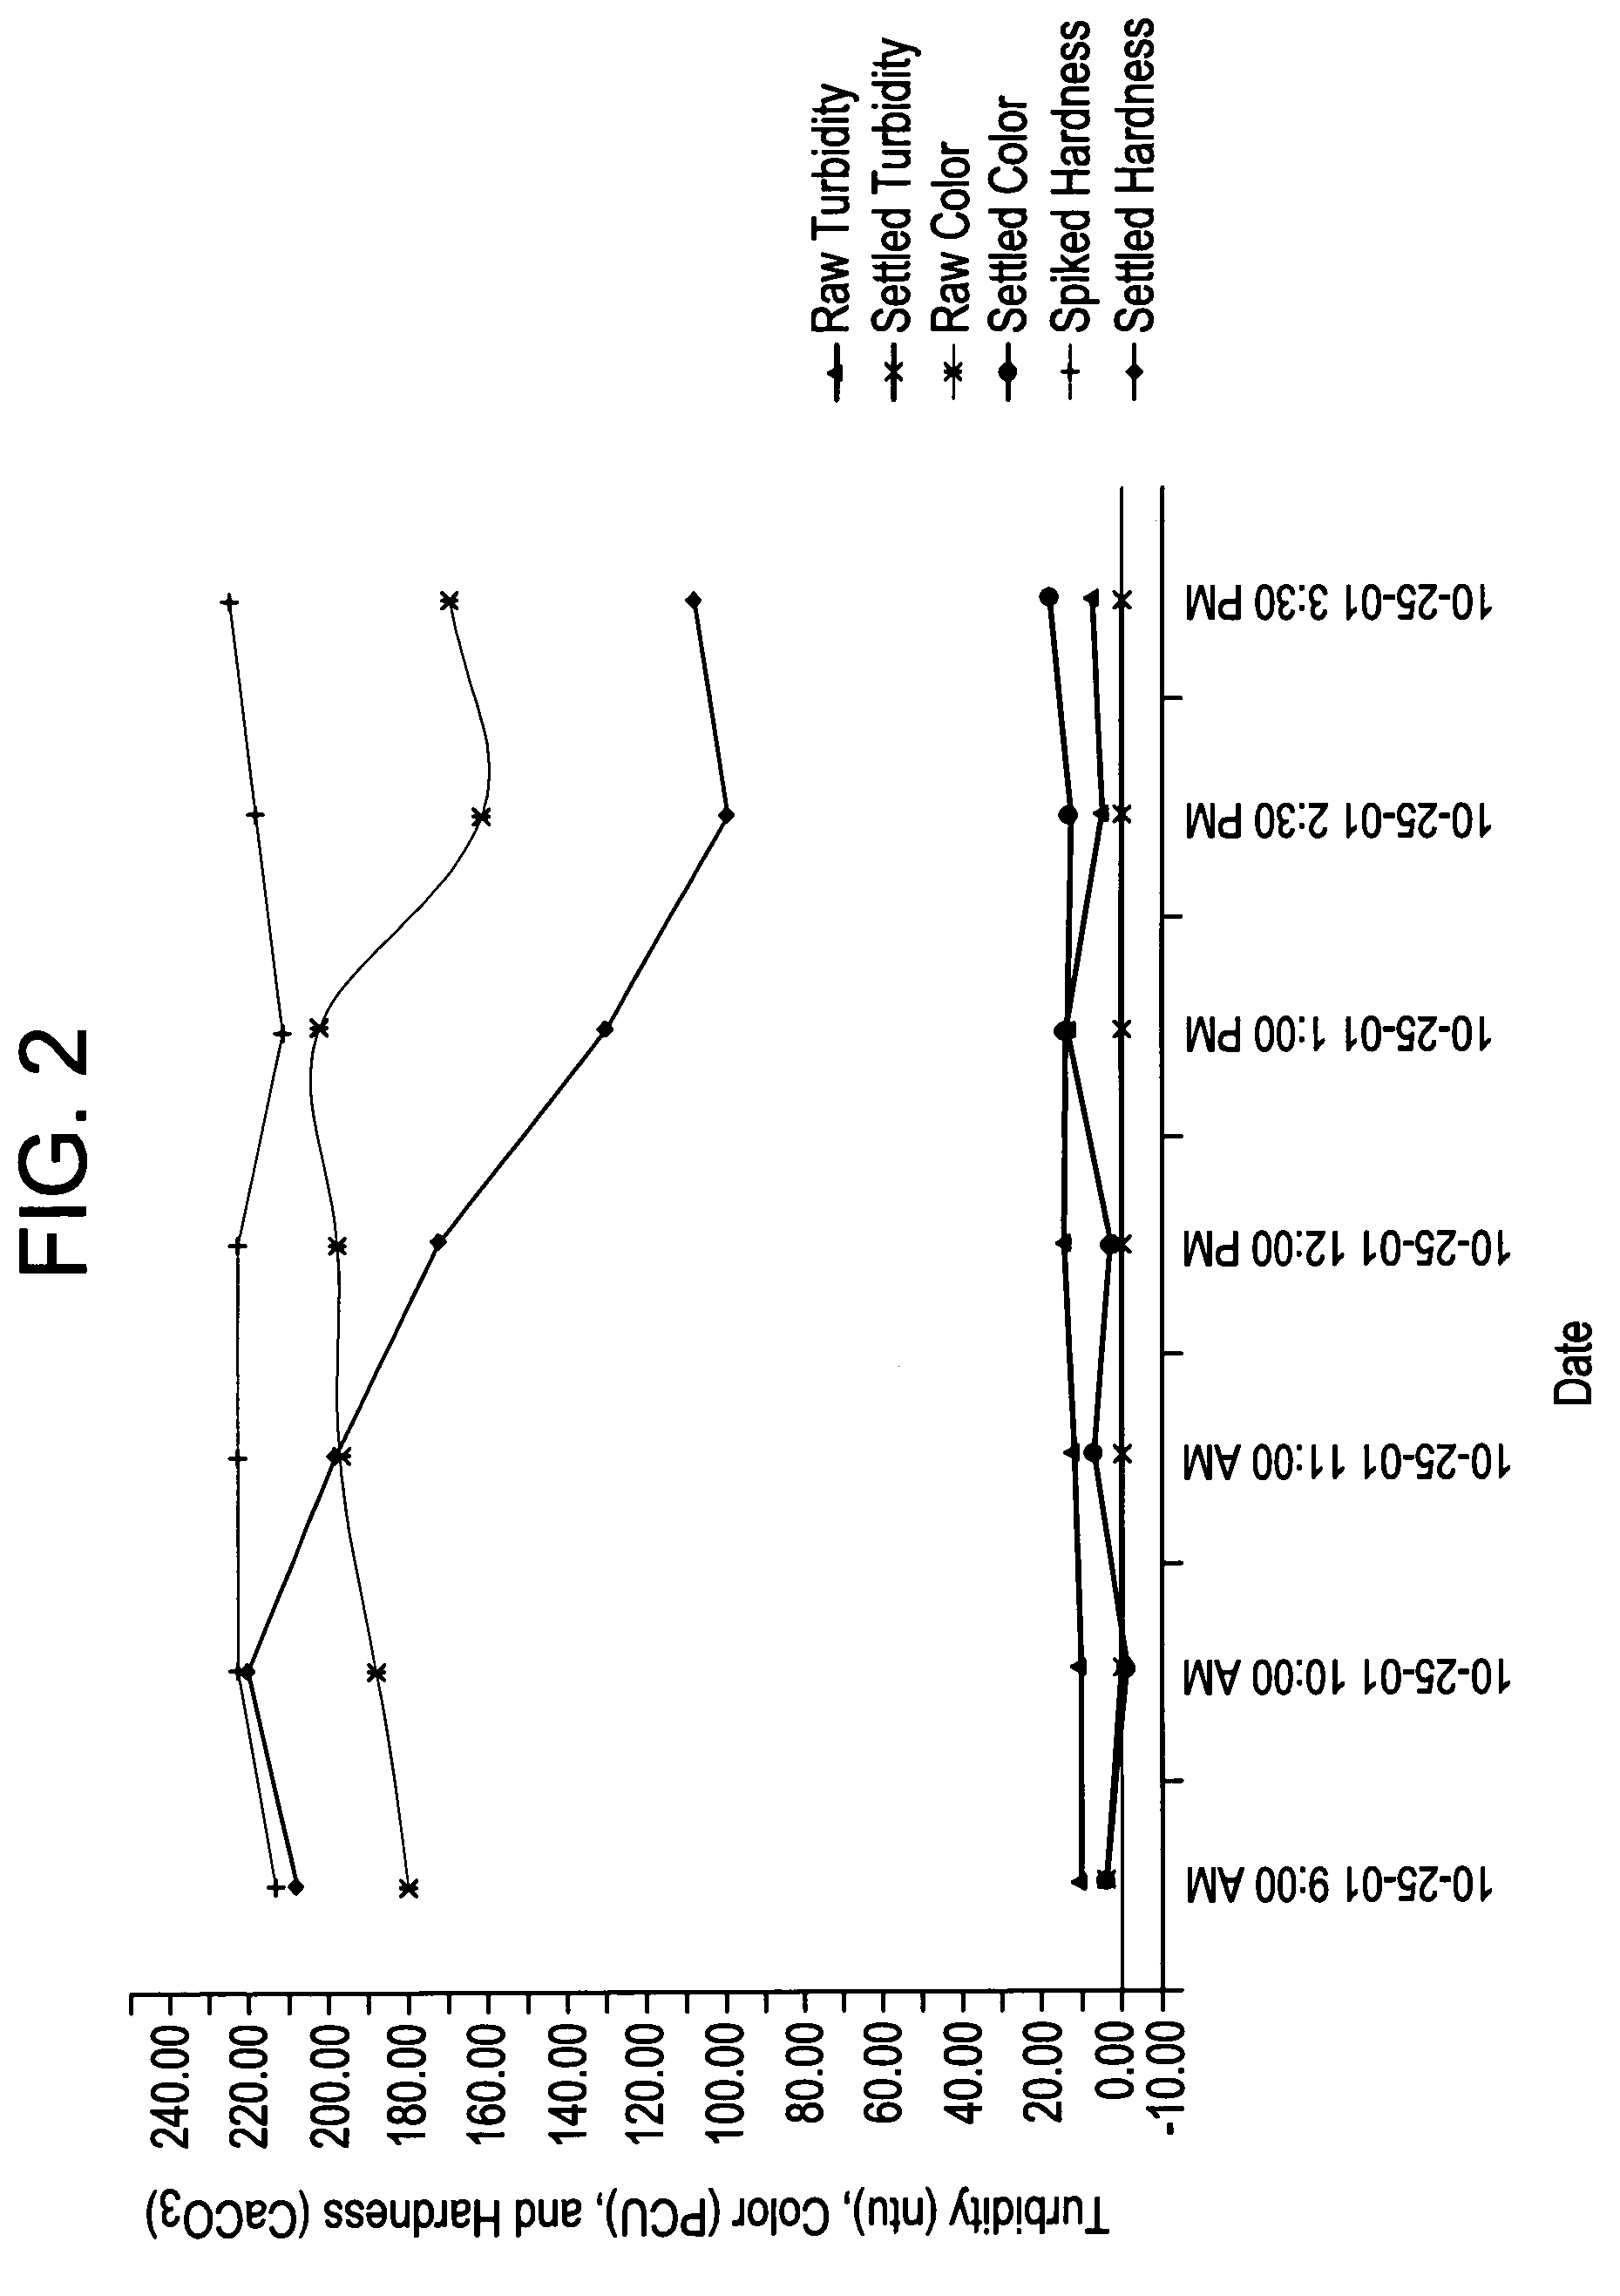 Method and apparatus for treating water or wastewater to reduce organic and hardness contamination